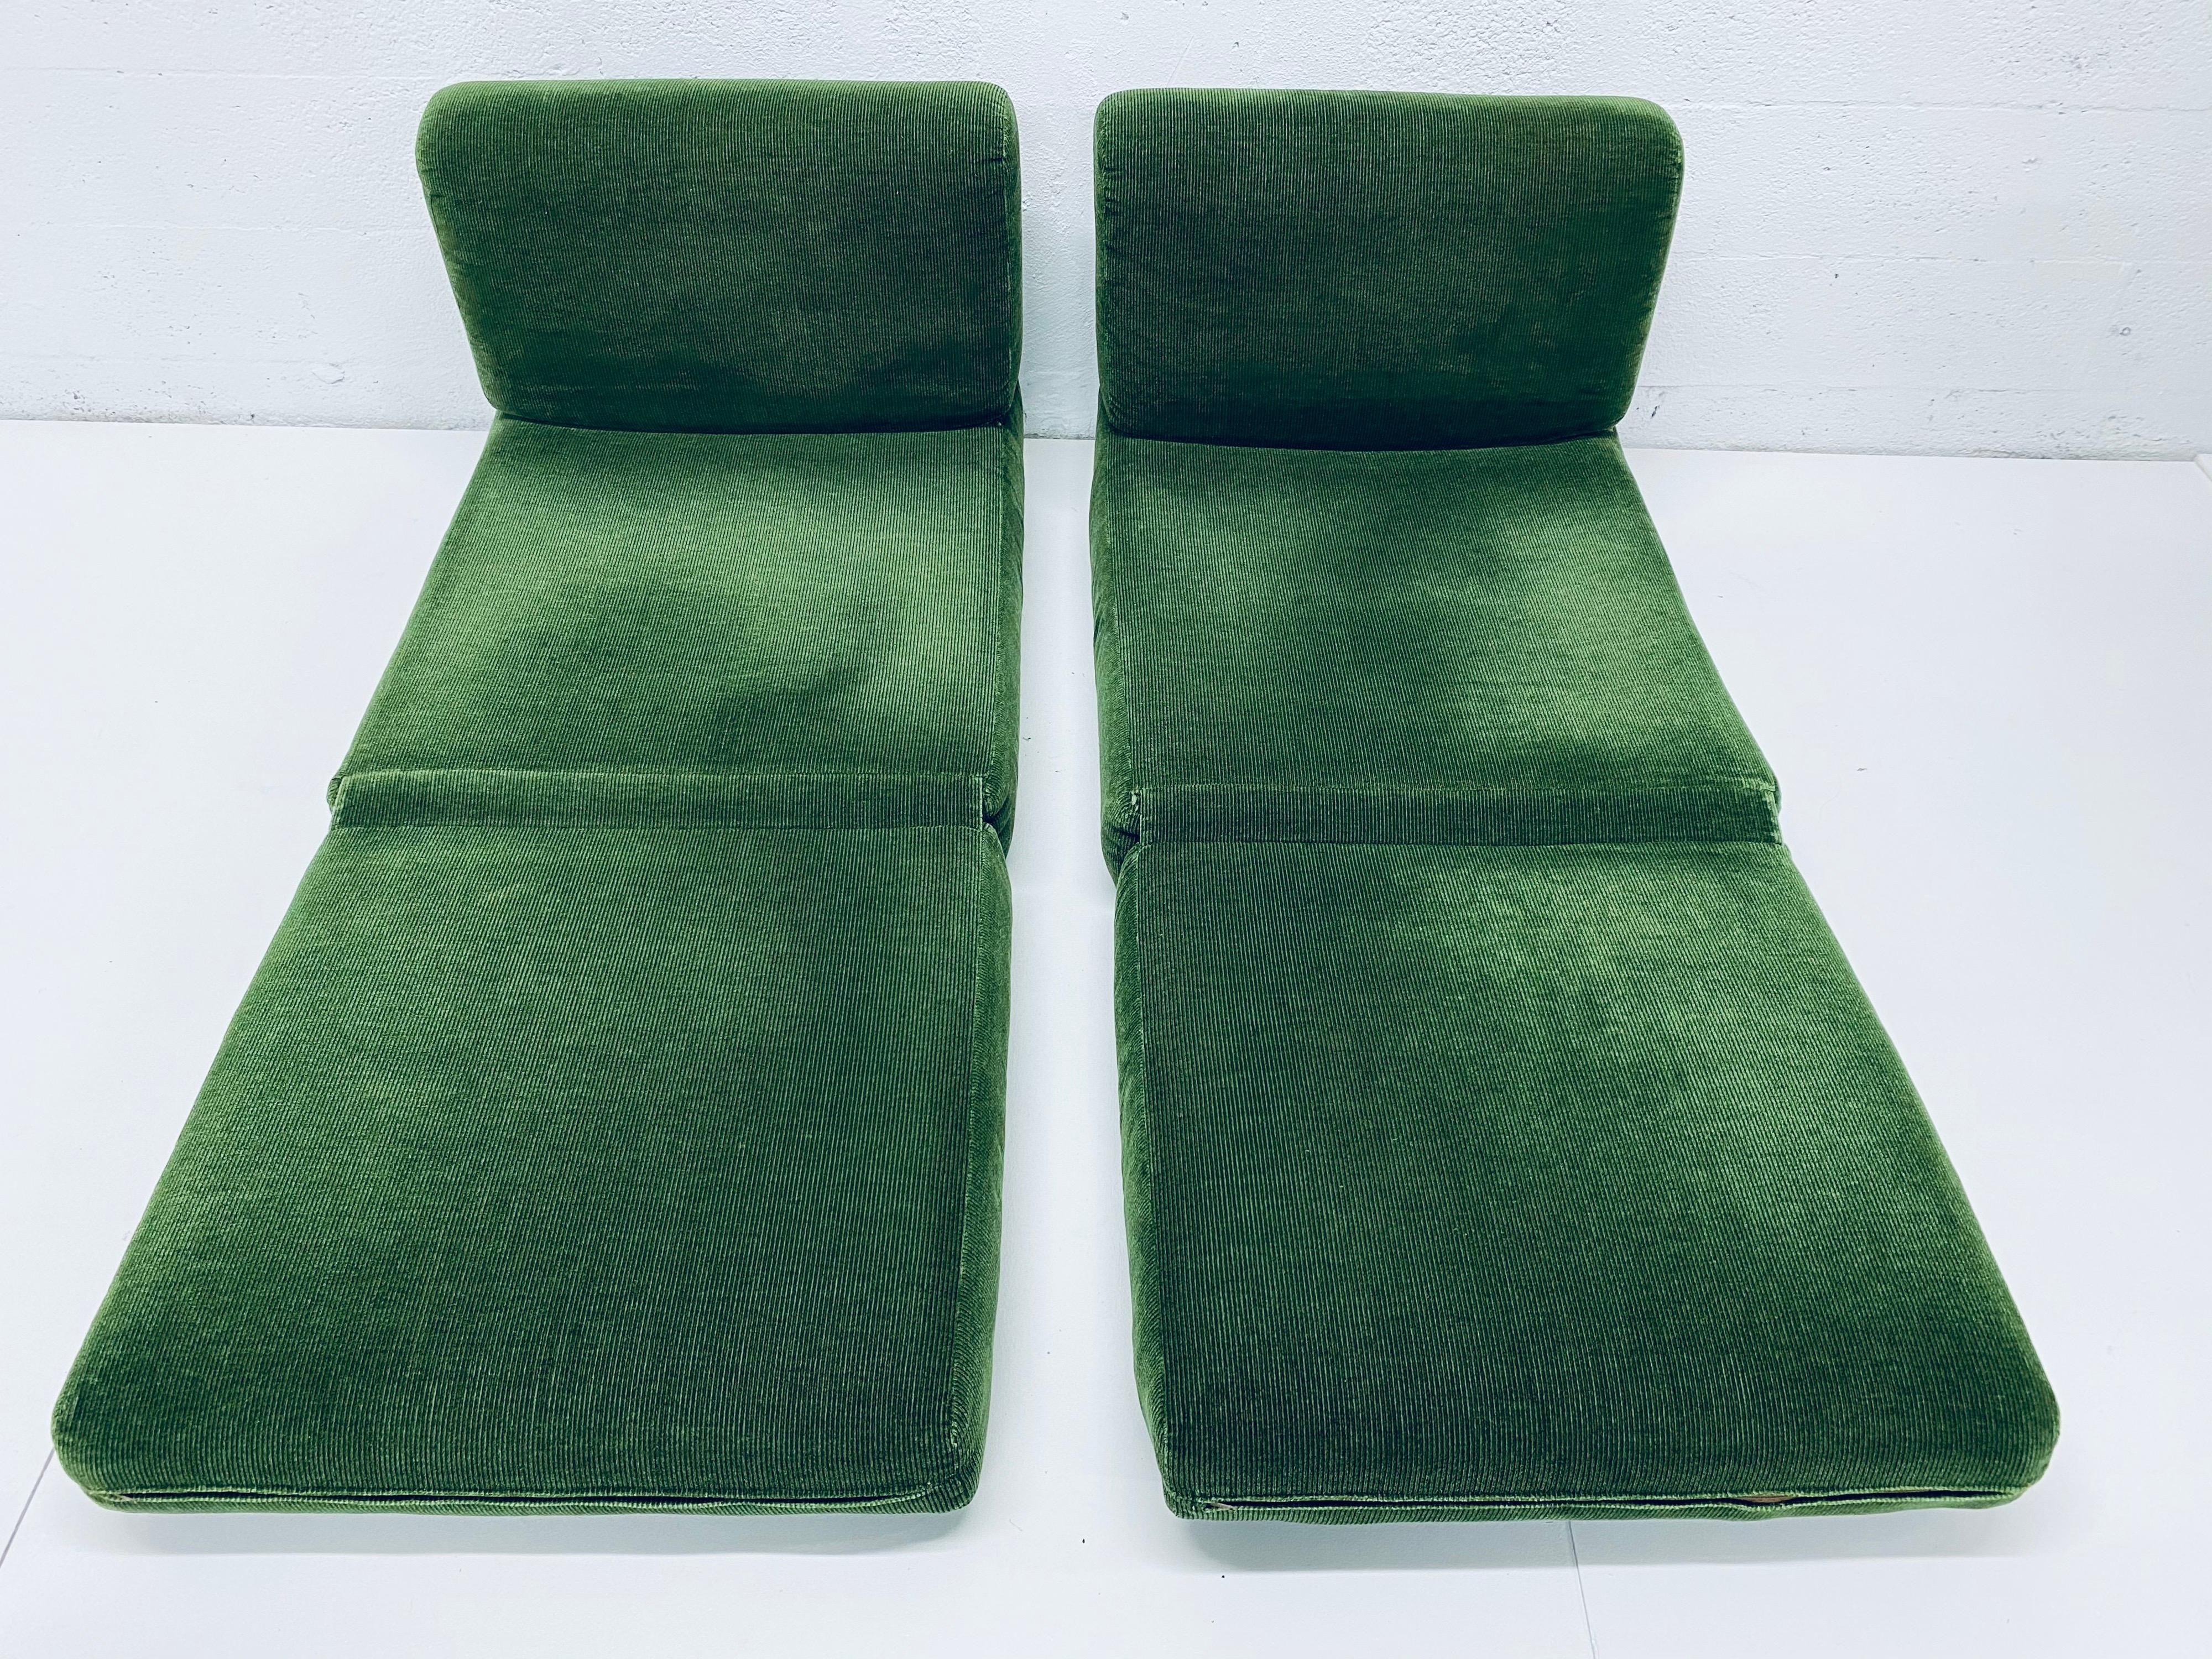 Green corduroy upholstered lounge chairs with pillows that fold out and convert into beds. The chairs are made of a foam back and foam seats. The fabric covers a wood base that the small feet are attached to and keep the chairs off the ground. They